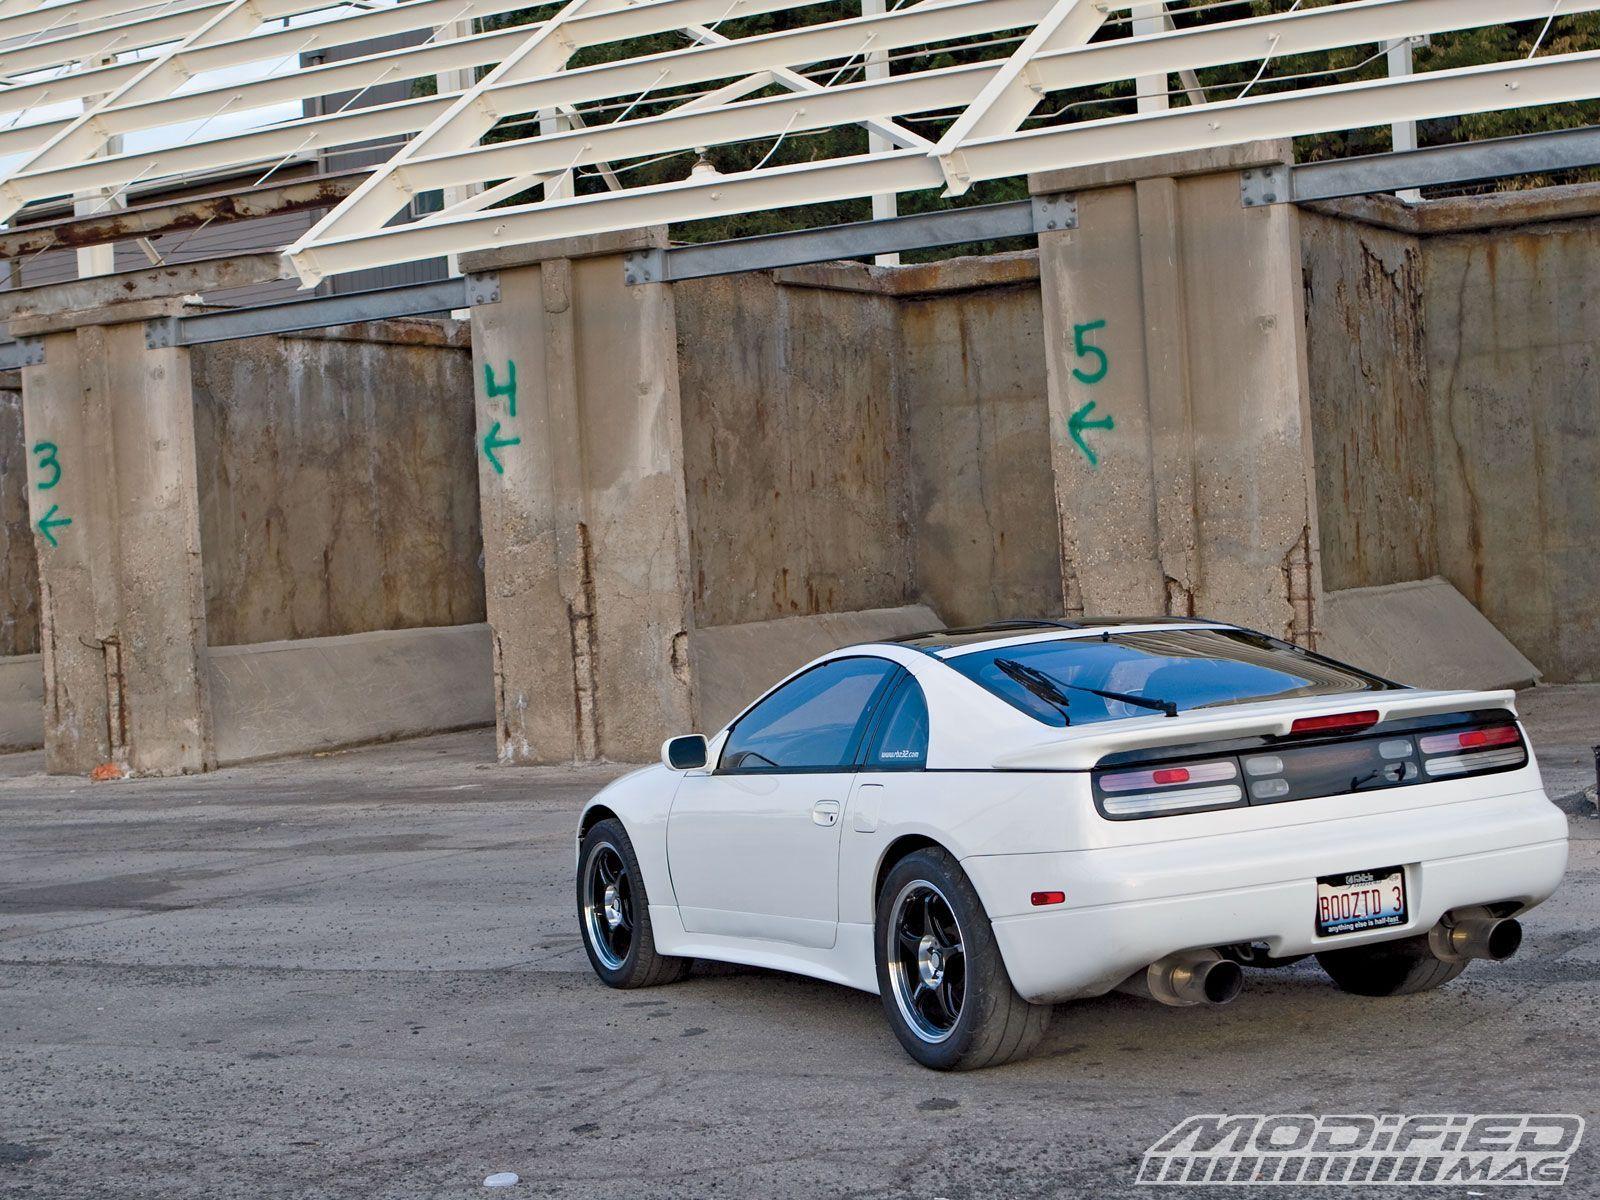 Andy Turpin's 1990 Nissan 300ZX Twin Turbo